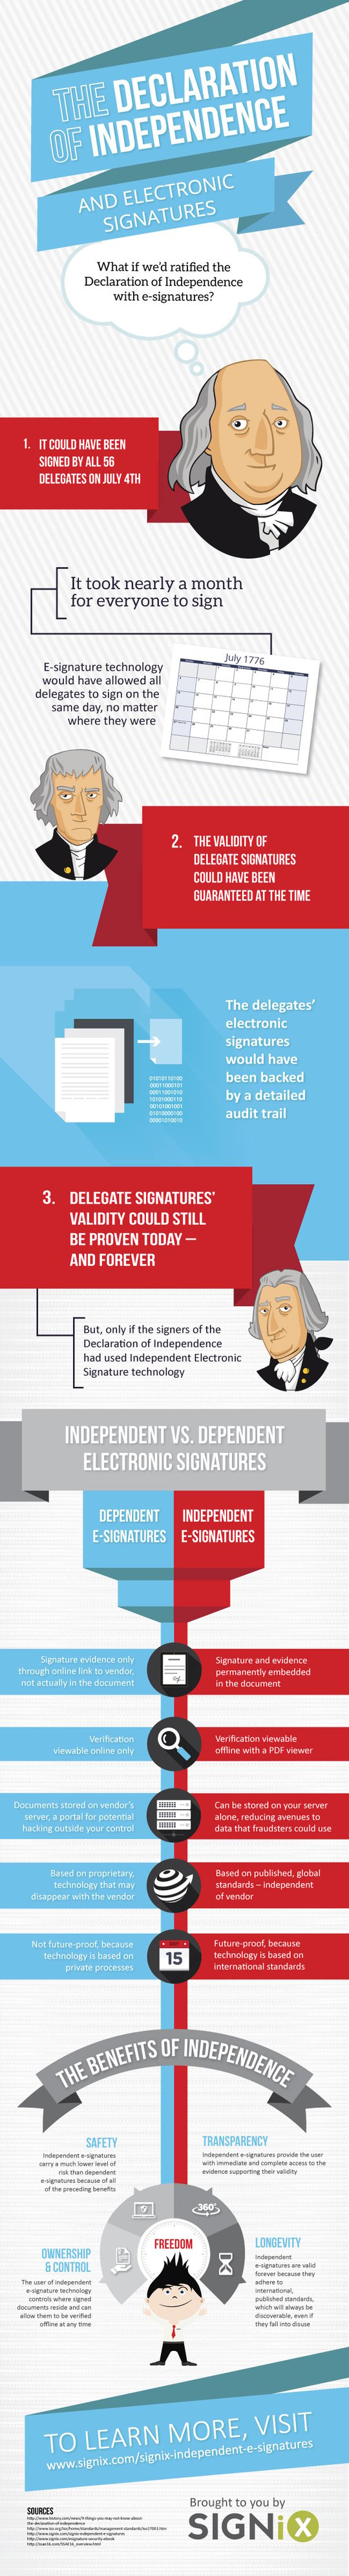 The Declaration of Independence and Electronic Signatures